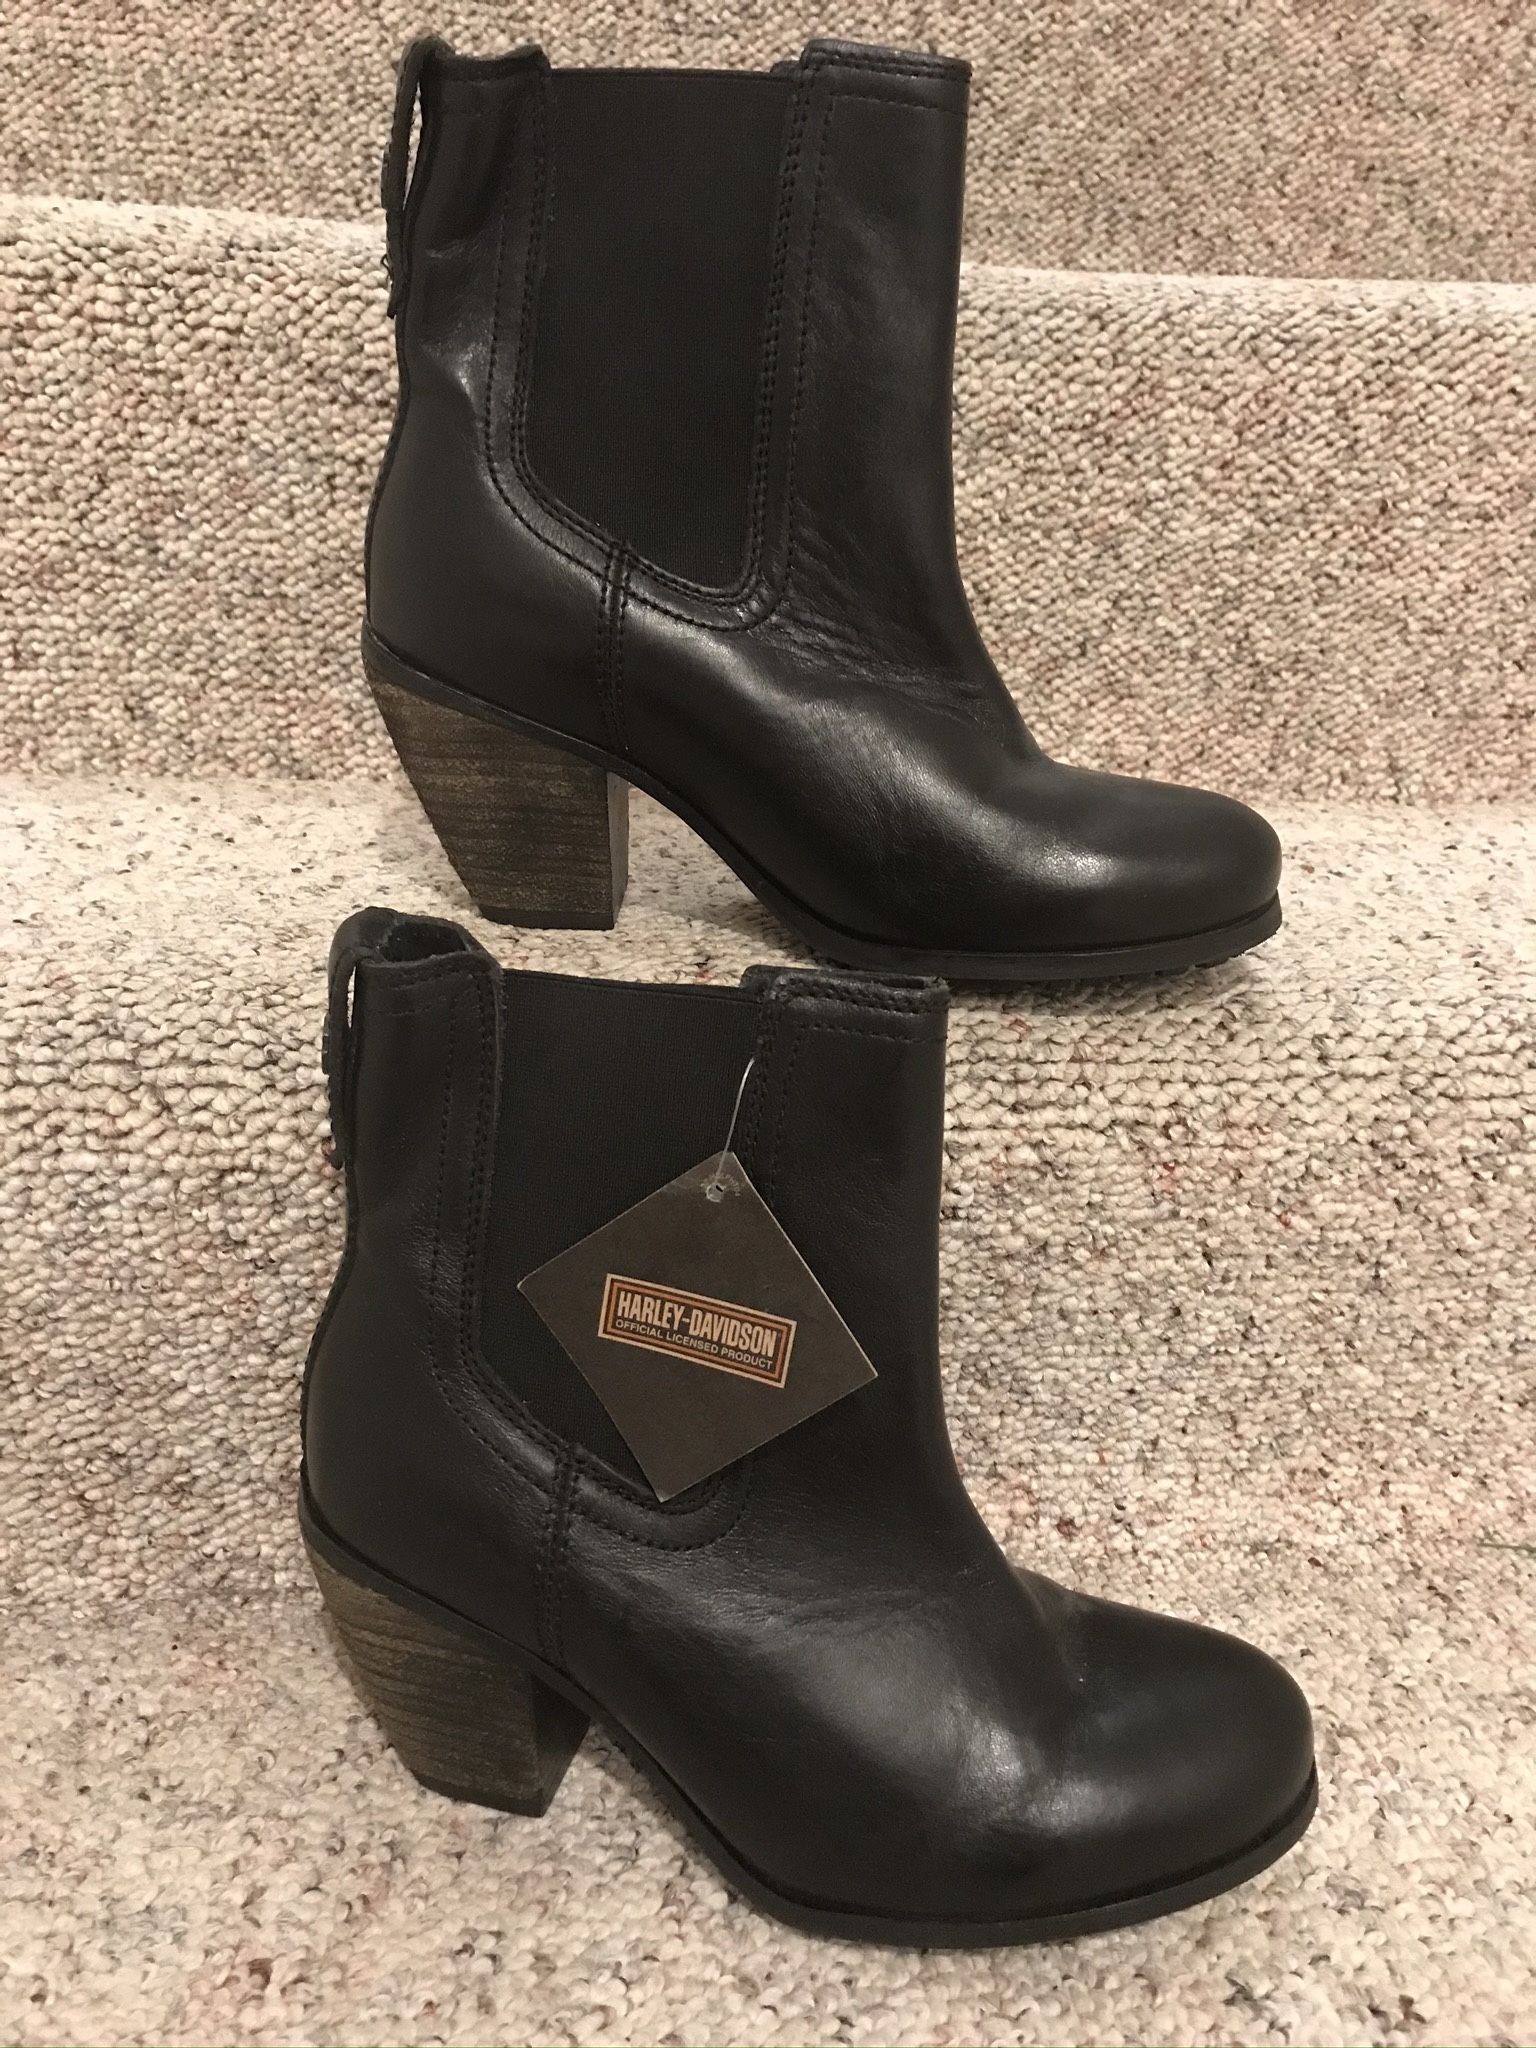 NEW WITH TAGS Harley Davidson Womens Motorcycle Boots Womens 8 M Ankle